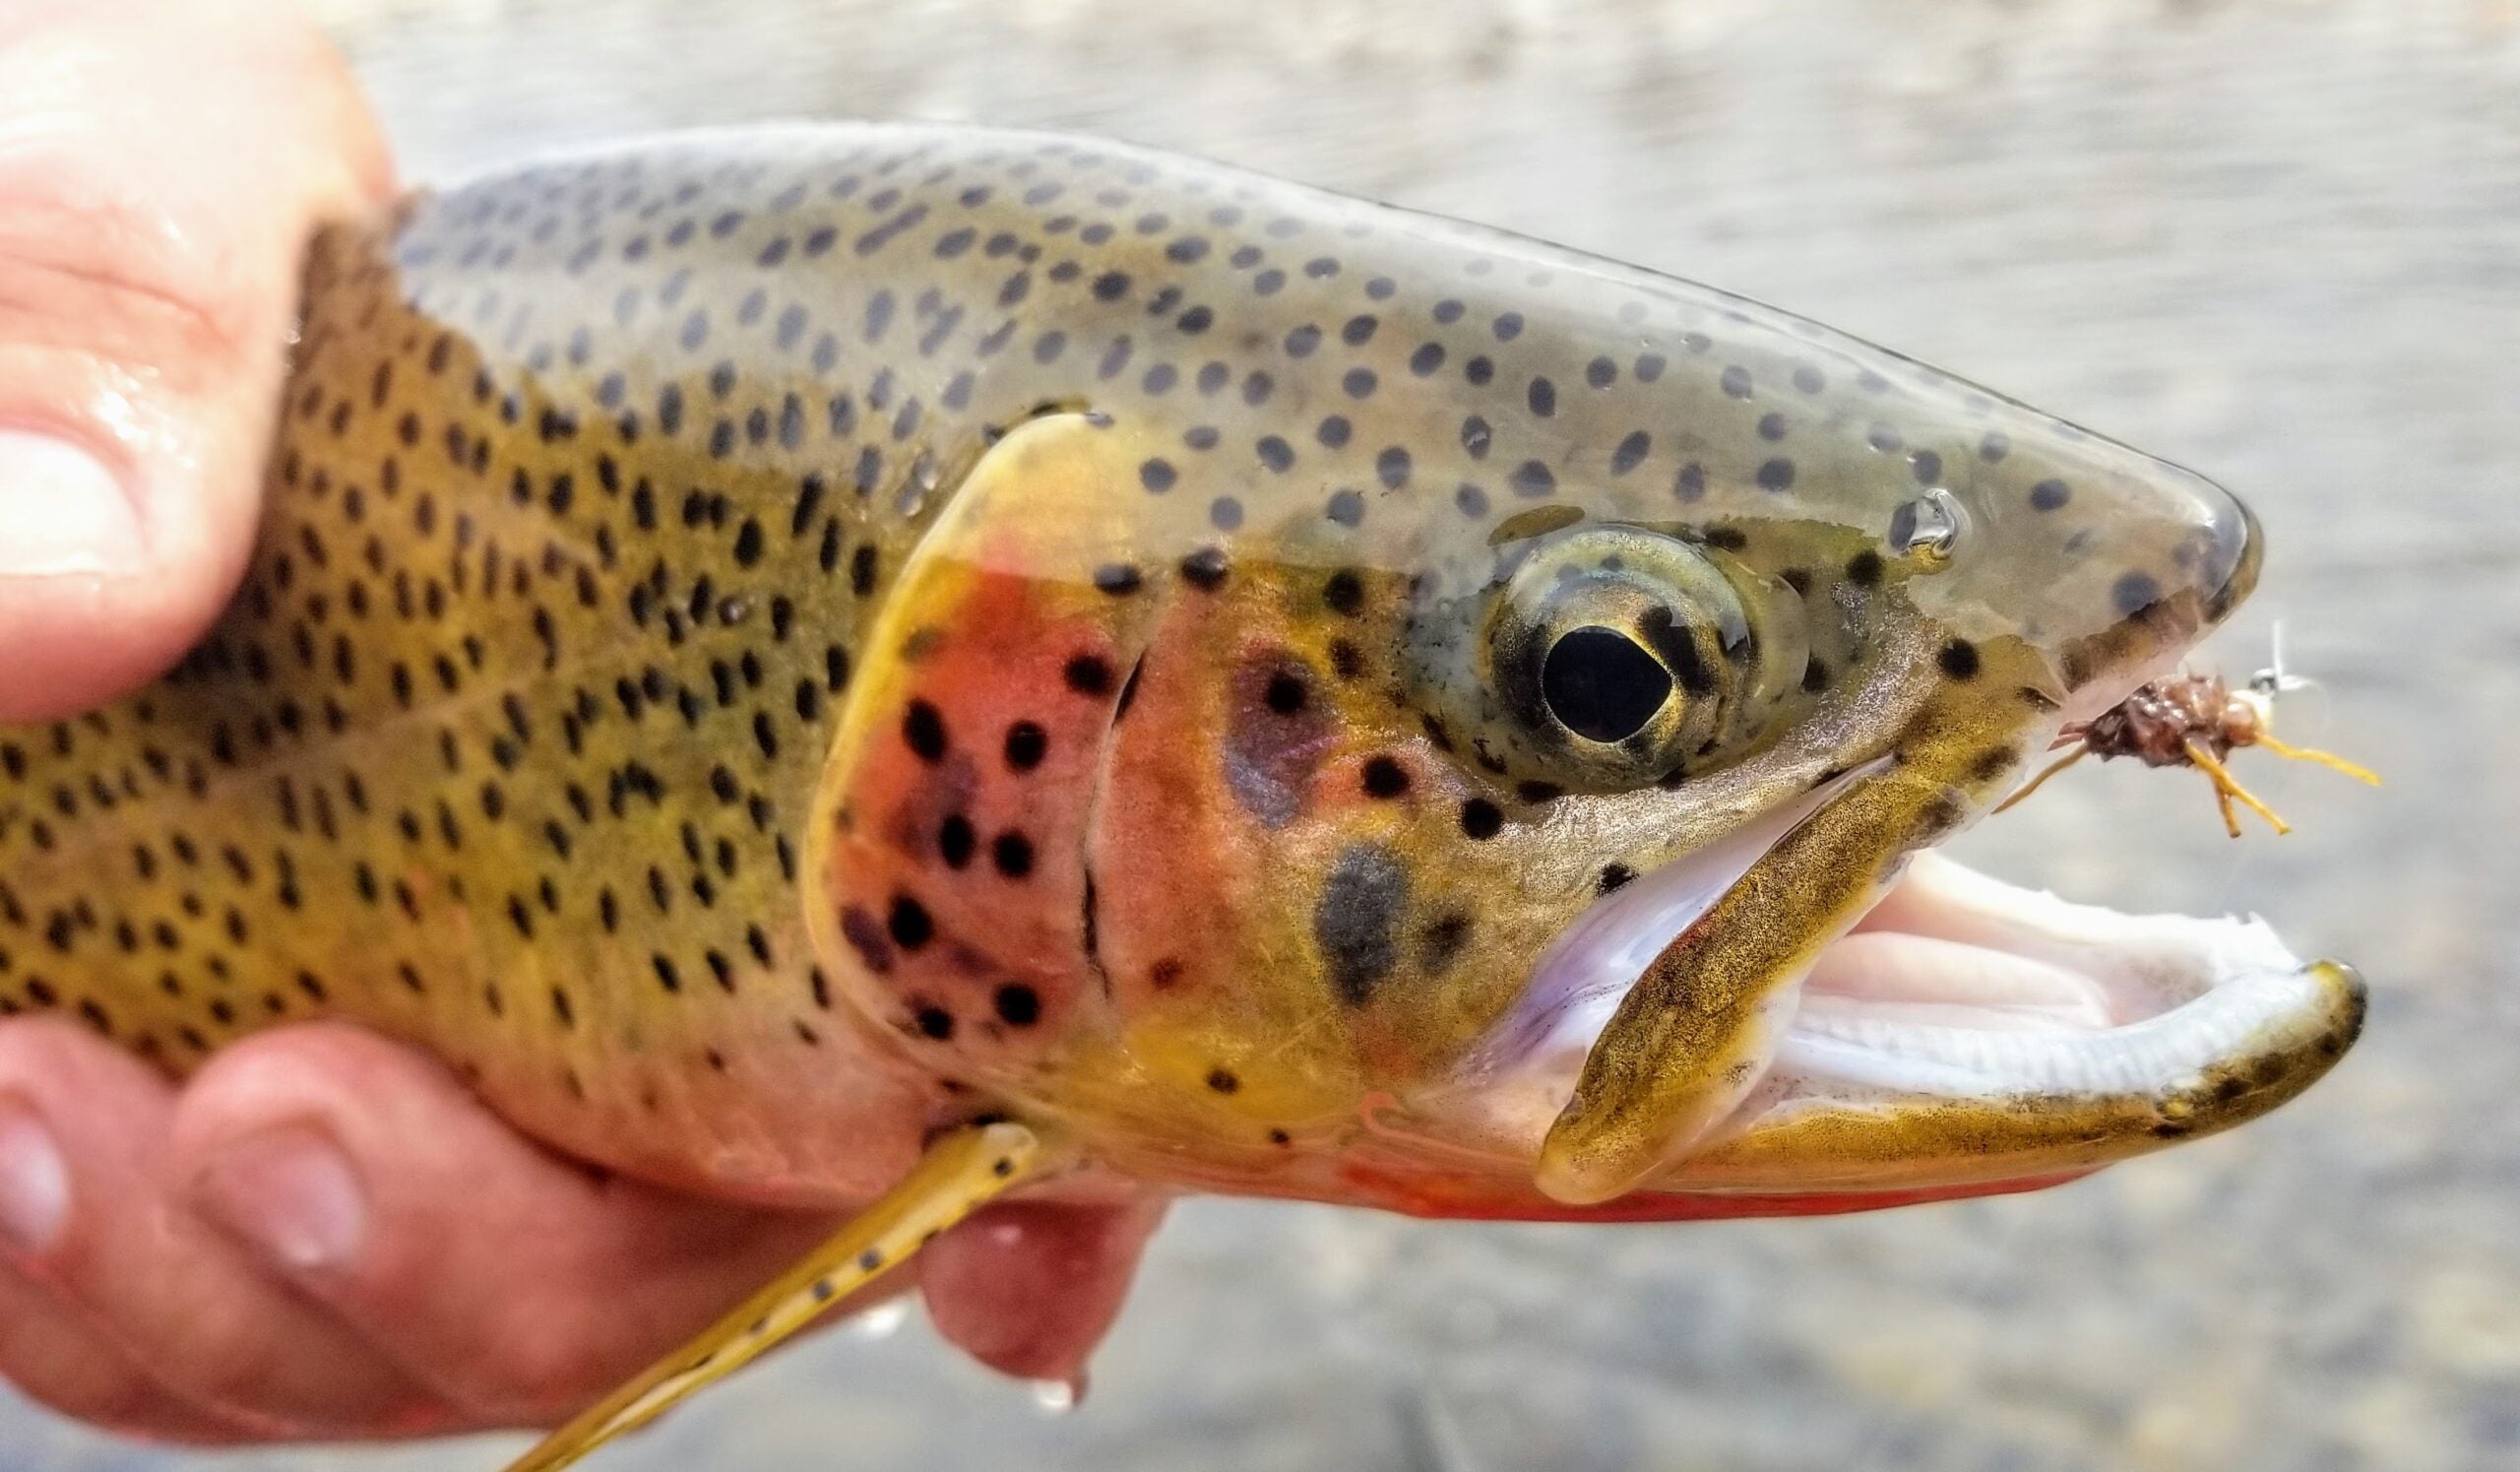 Saturday Morning Fishing Report: A Wet Weekend in Store – Mix